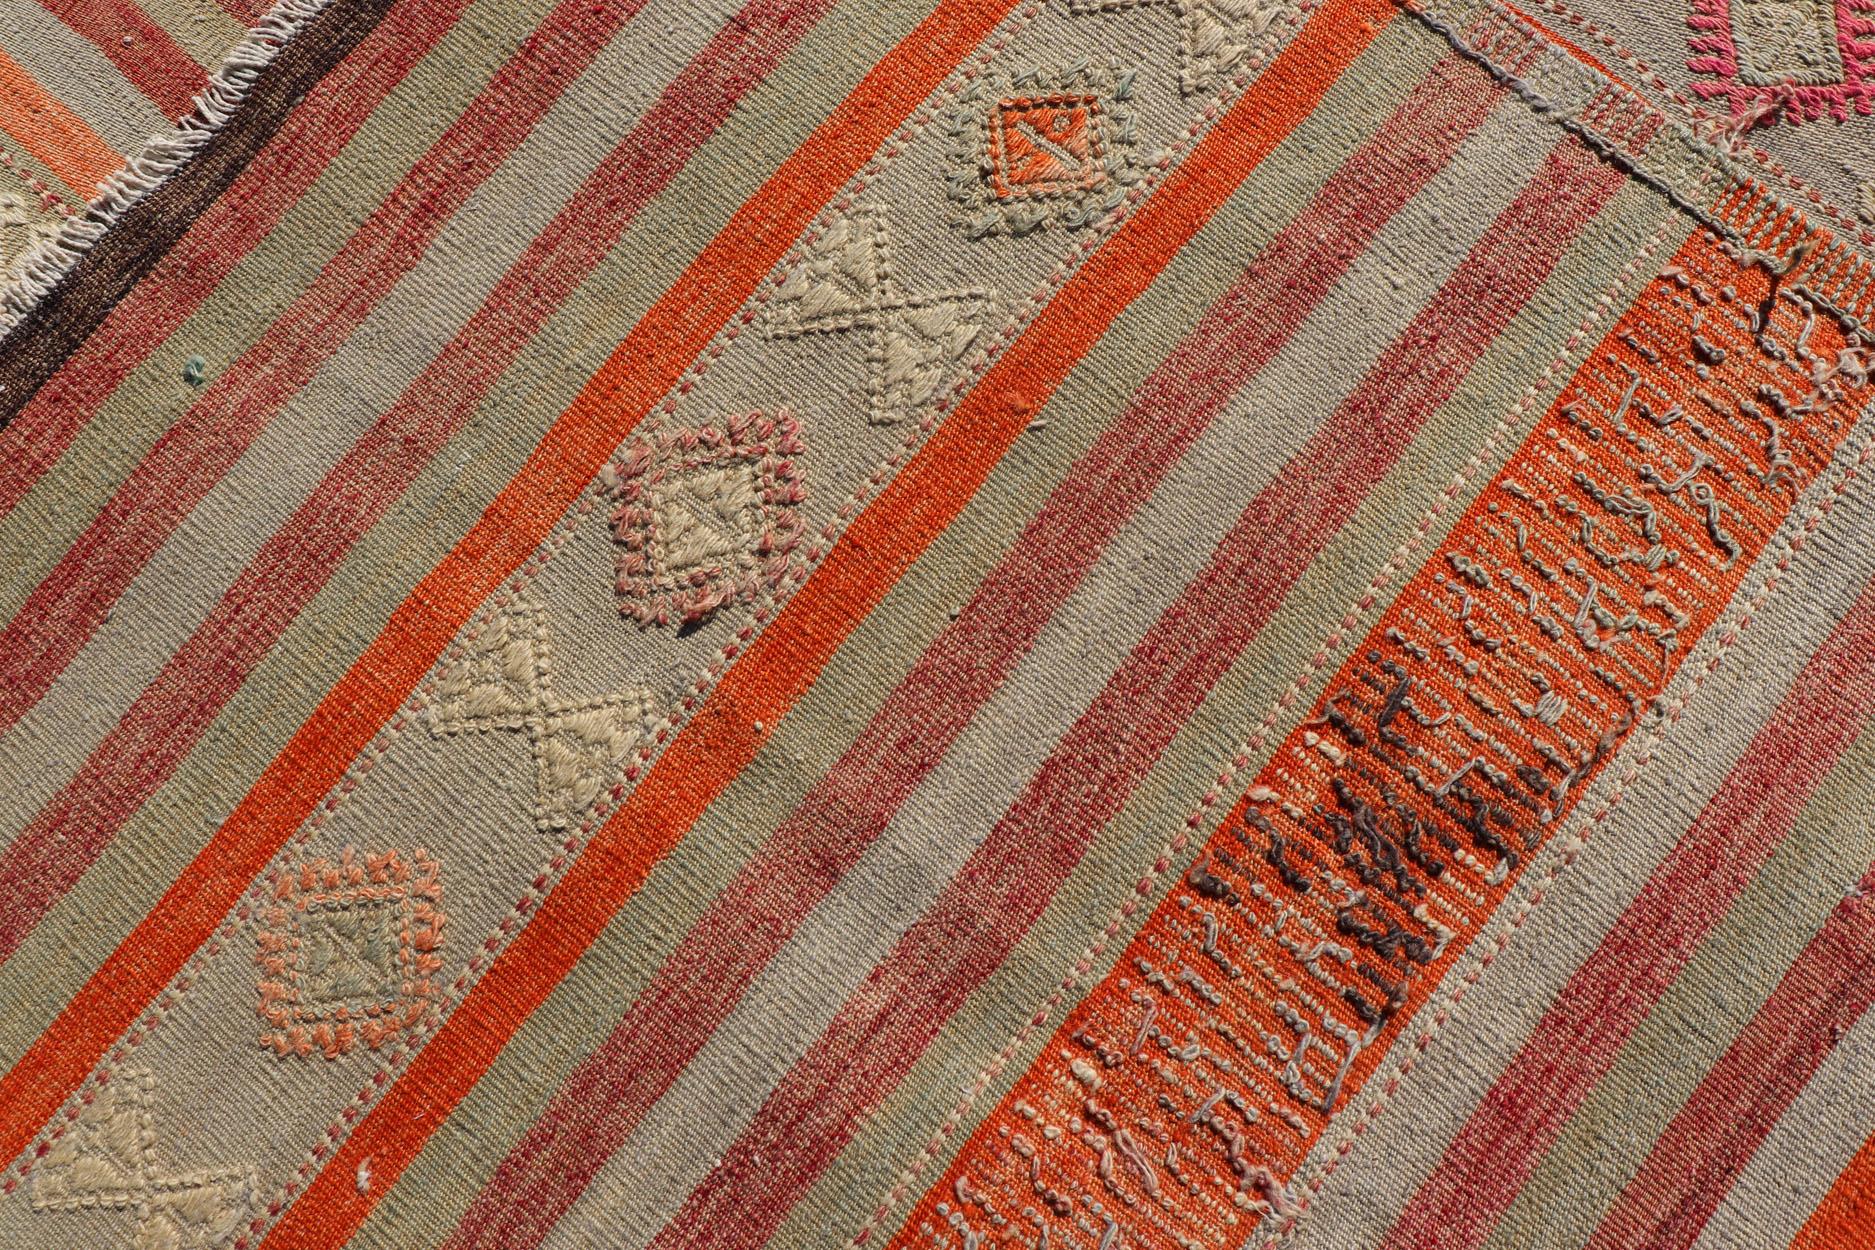 Wool Vintage Turkish Kilim with Colorful Stripes in Orange, Lt. green, red & gray  For Sale